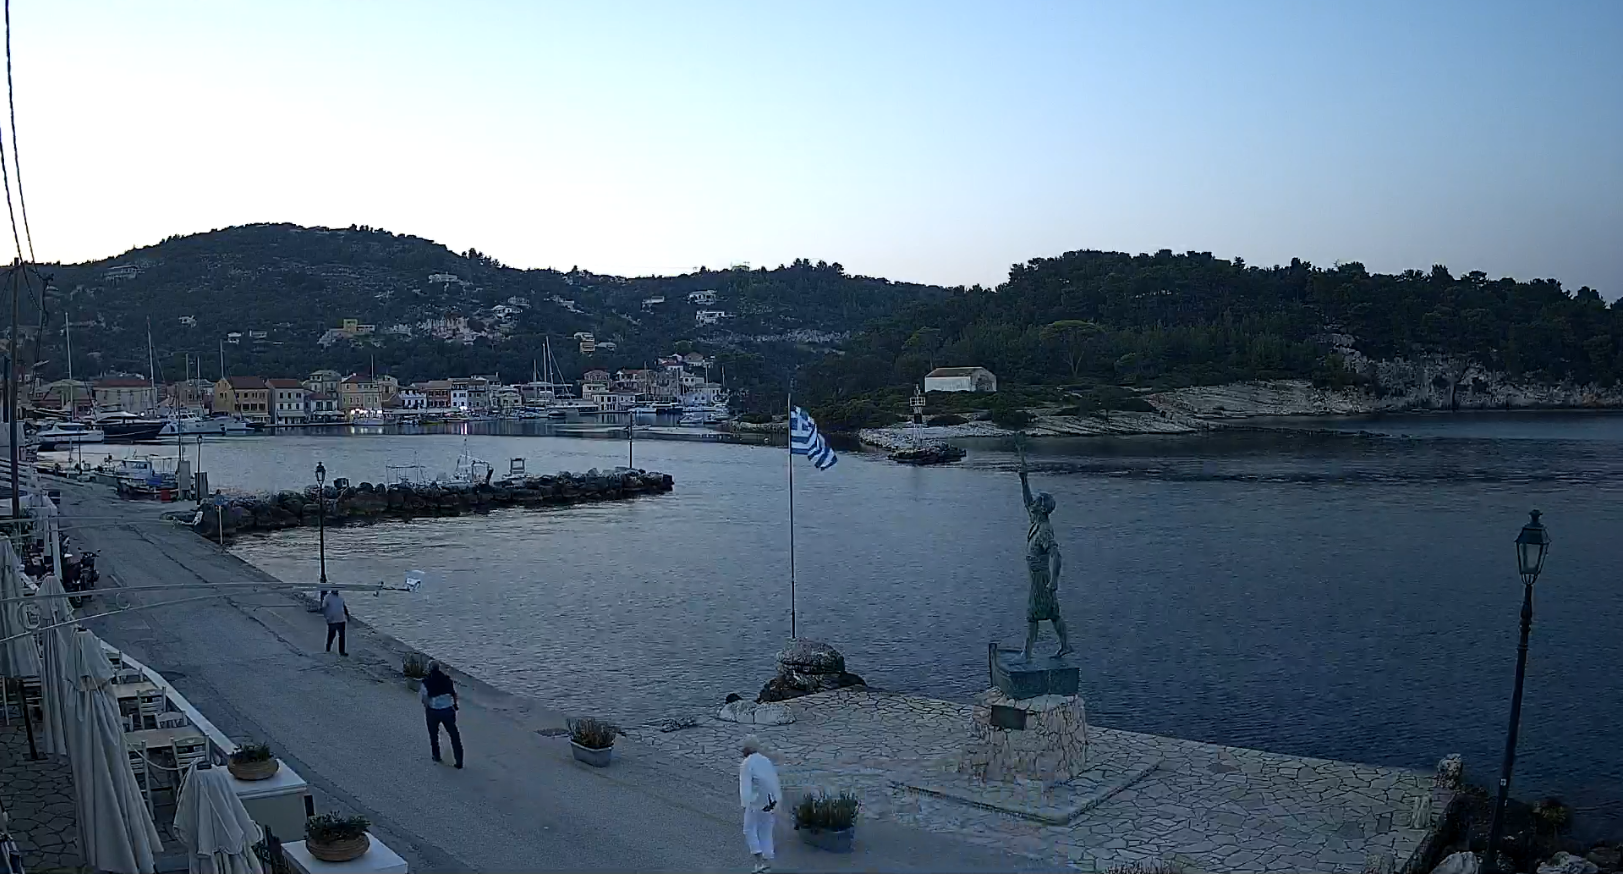 Paxos webcam: view live images from this island